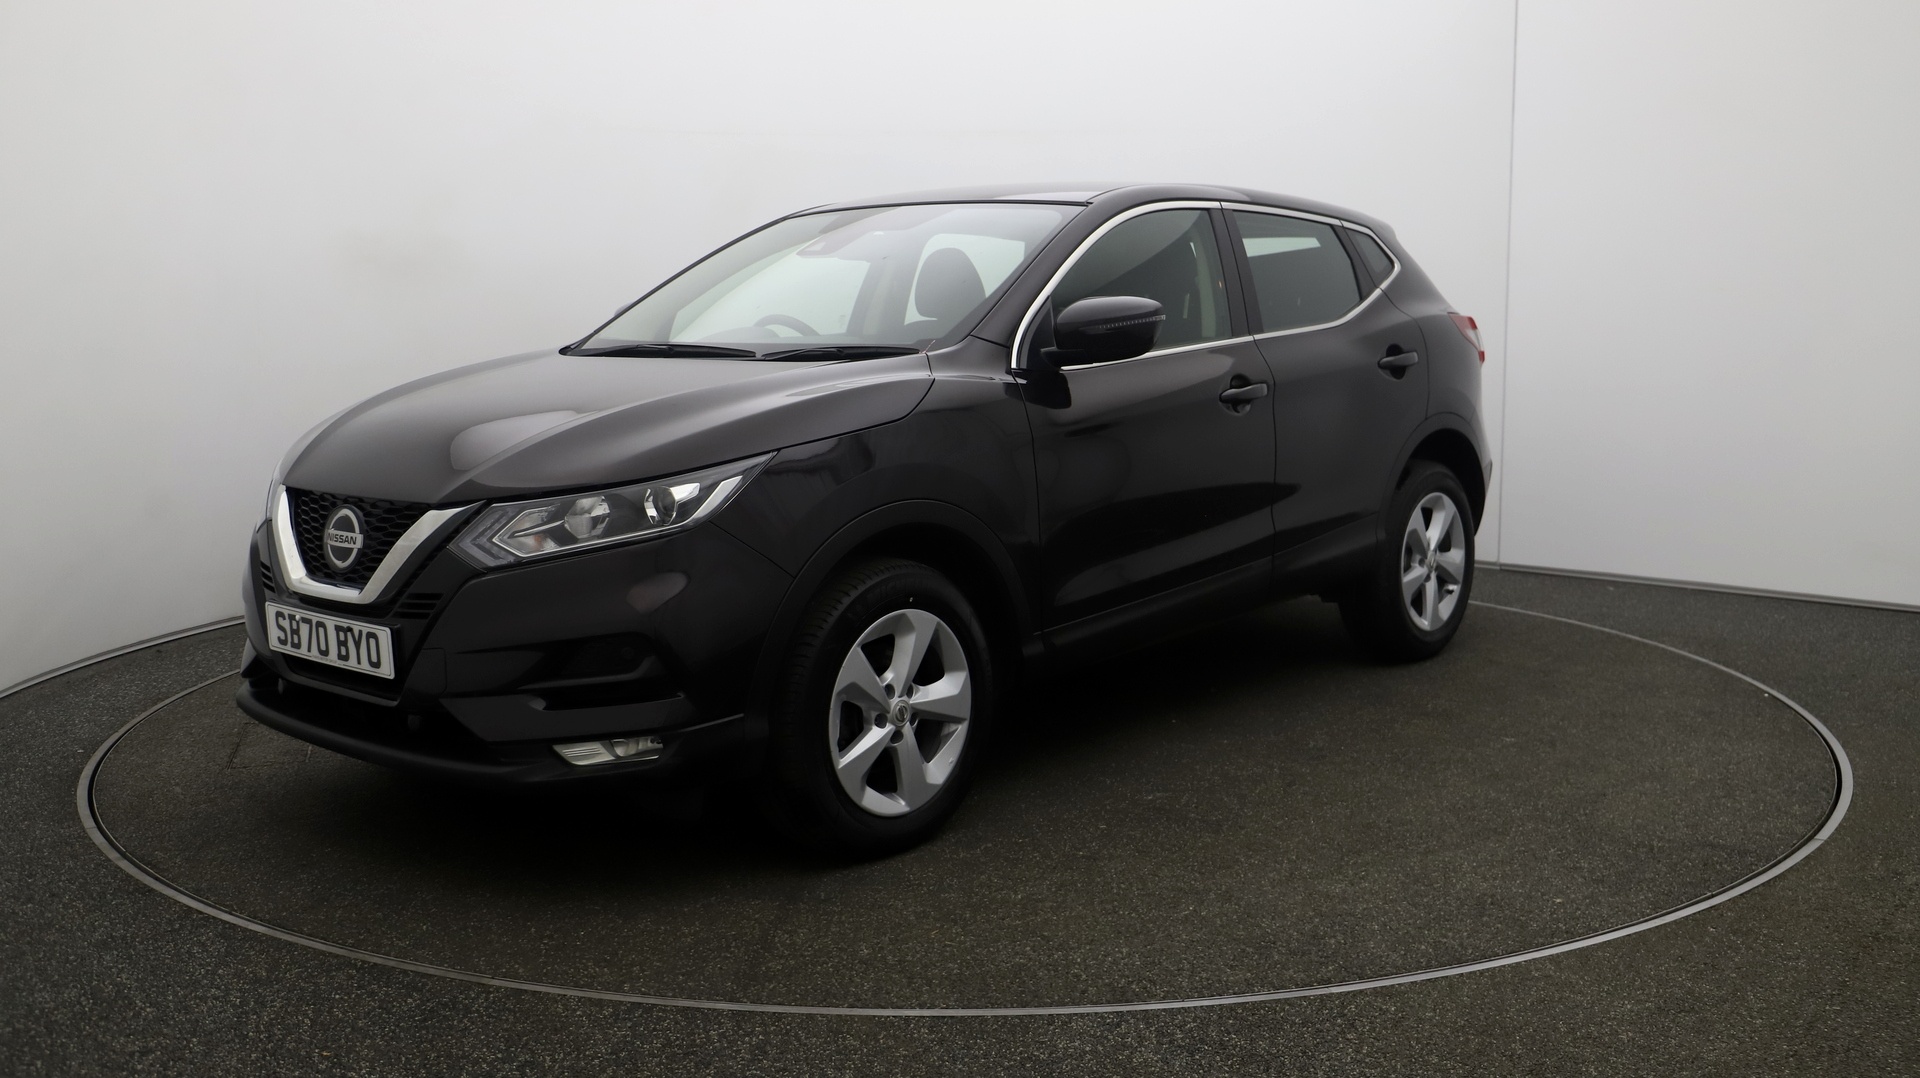 Nissan Qashqai Lease Deals Starting From £242